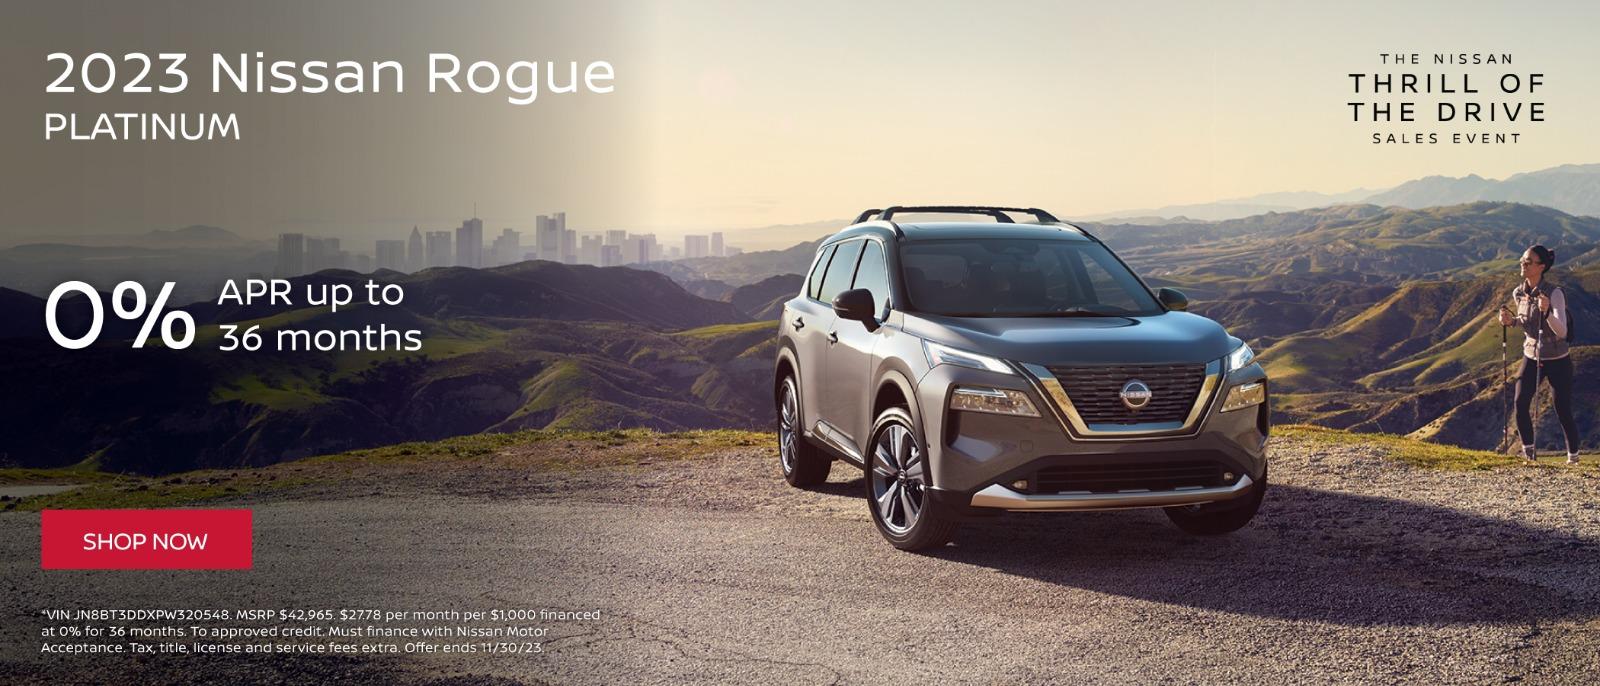 2023 Nissan Rogue 0% Apr up to 36Months